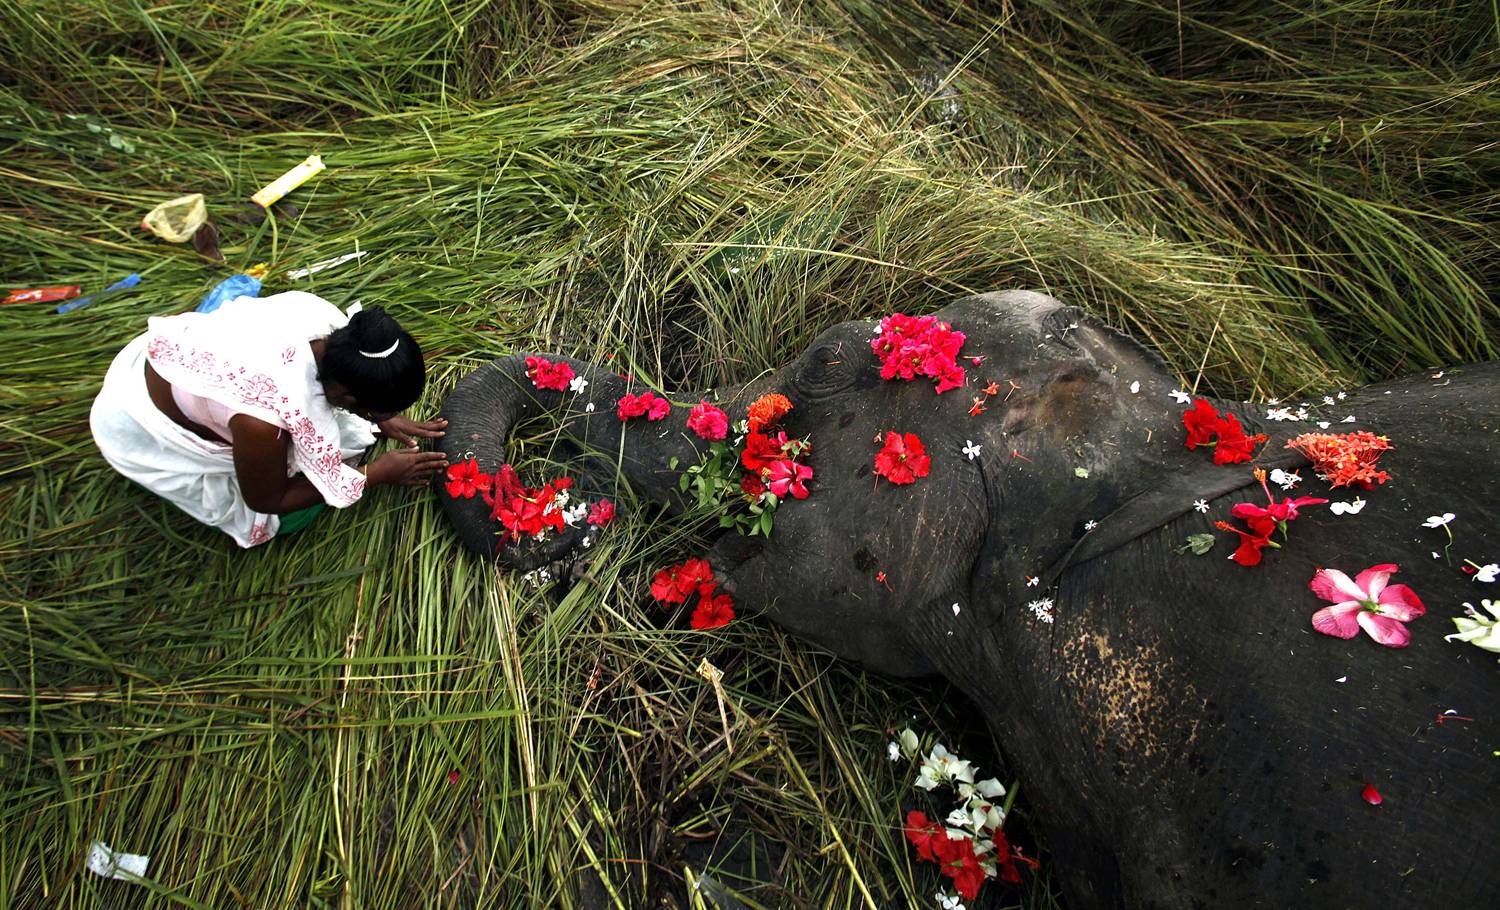 Funeral for an elephant hit by a train in India